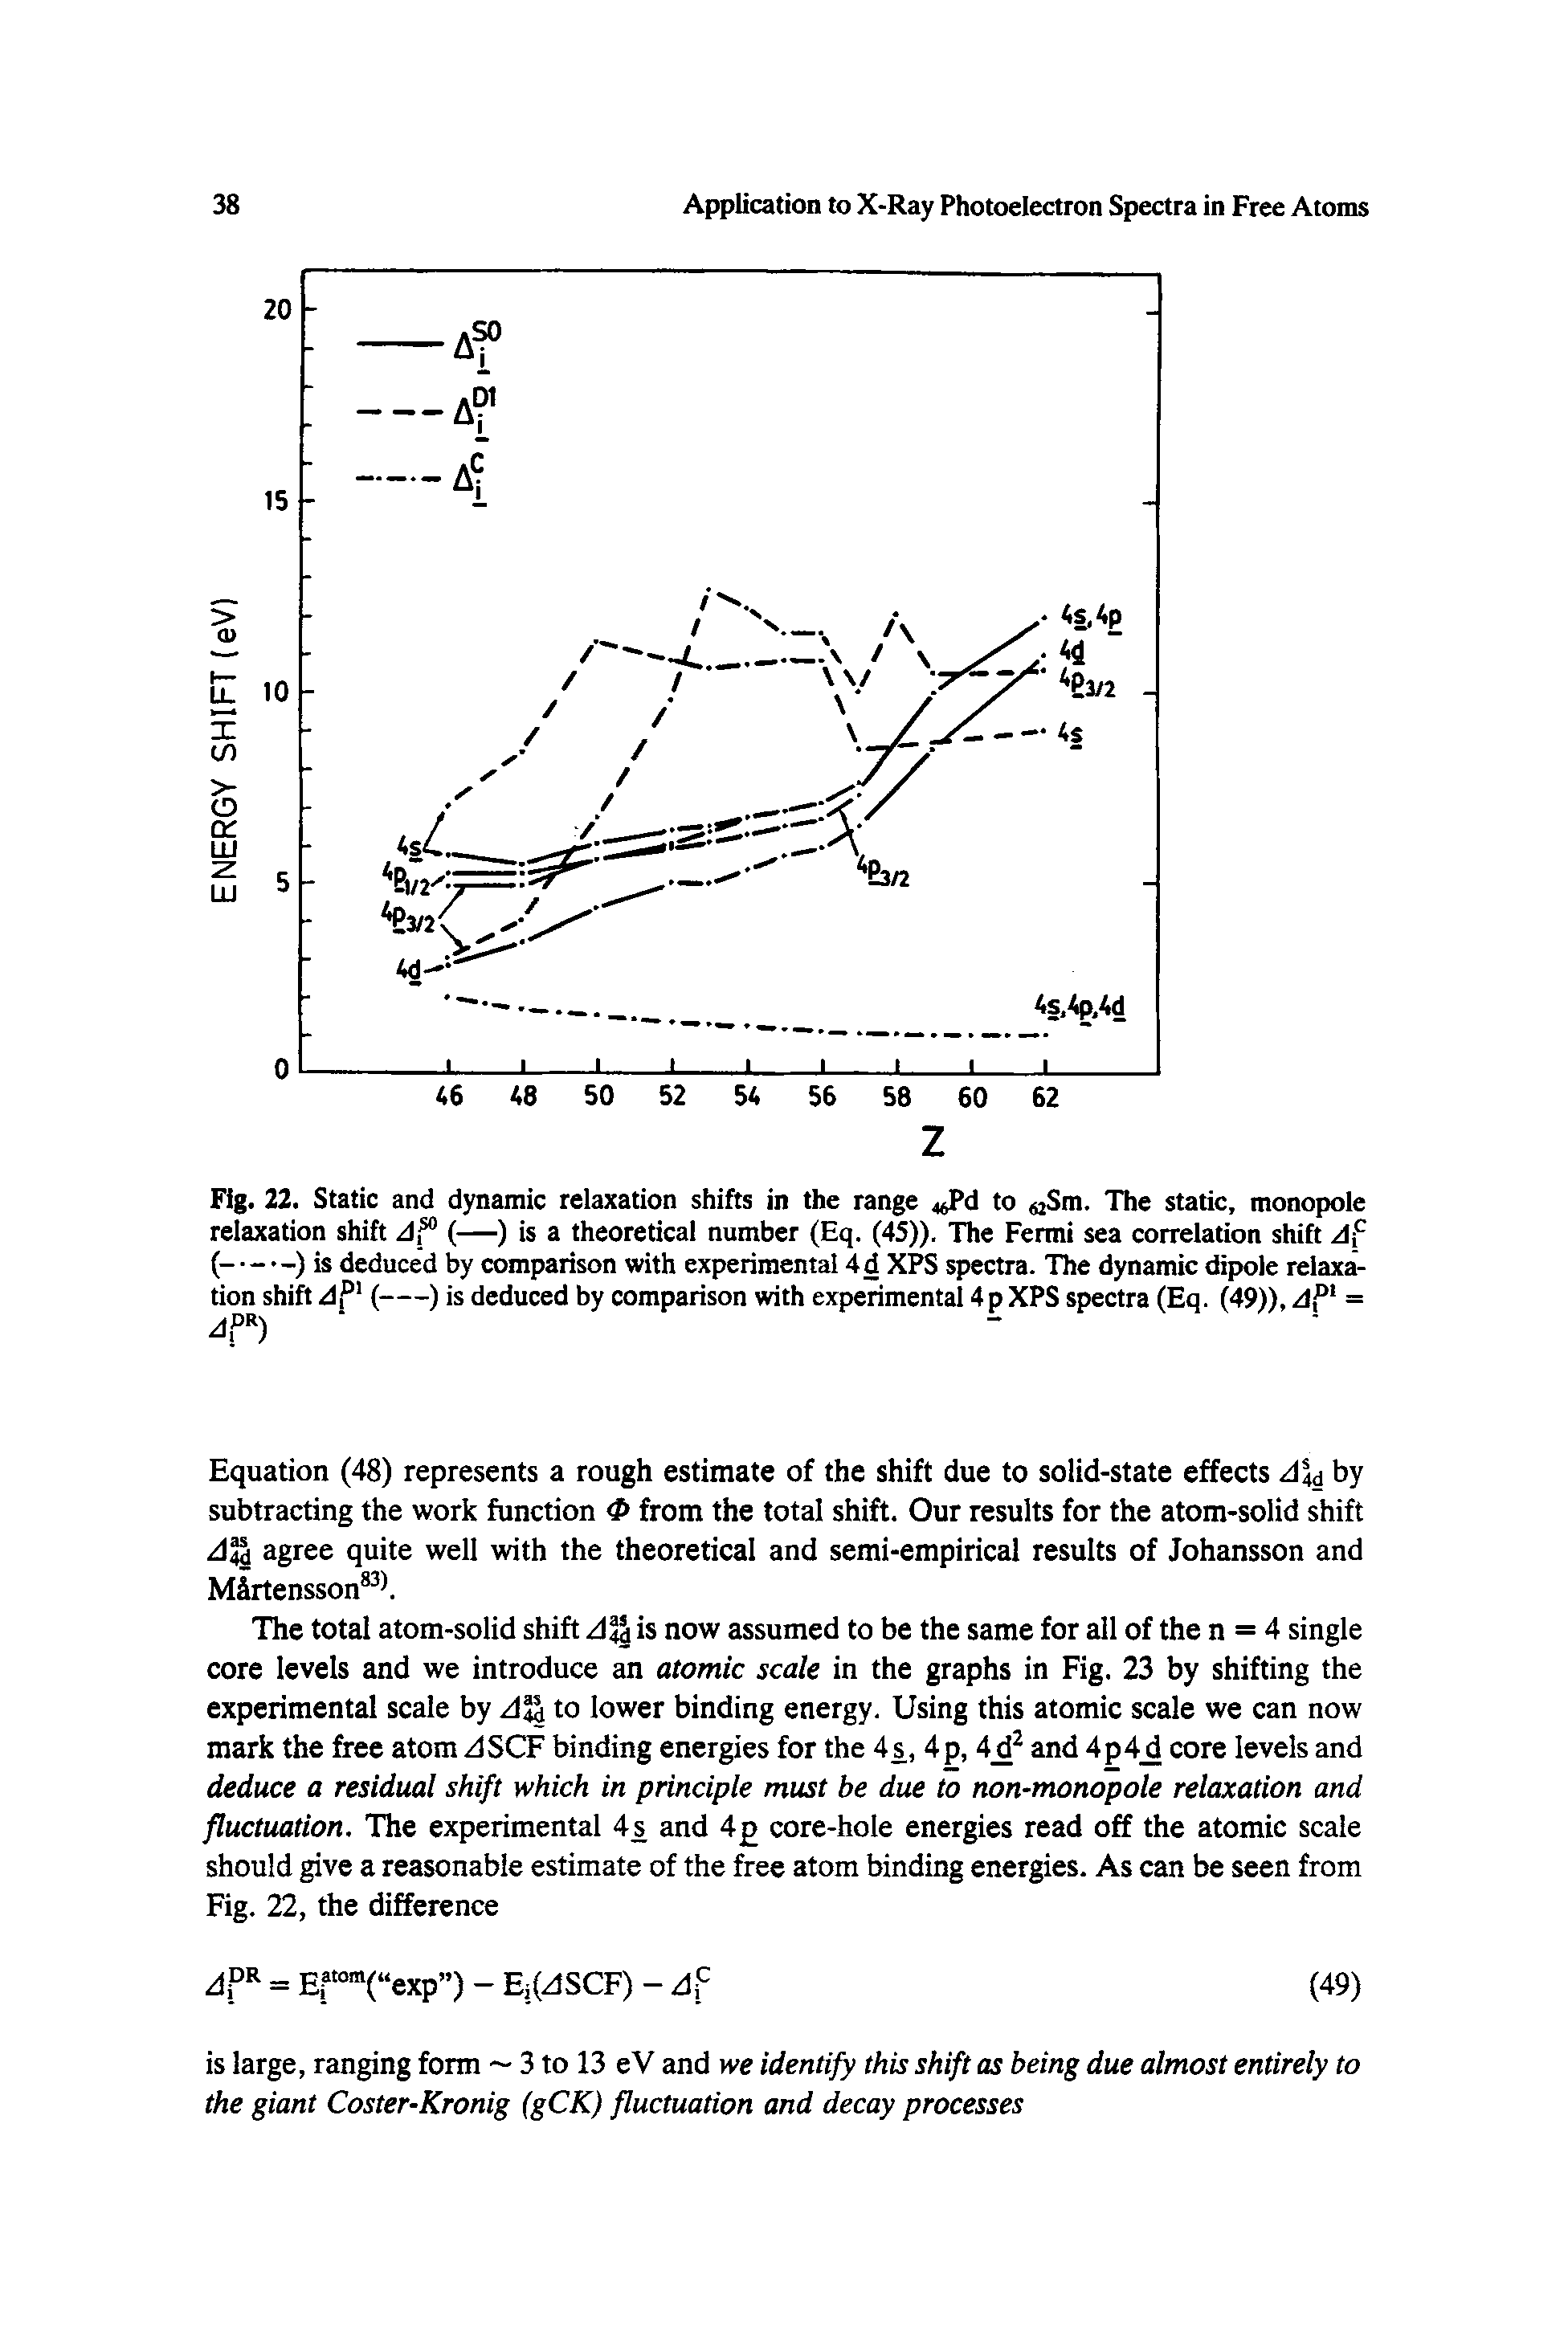 Fig. 22. Static and dynamic relaxation shifts in the range < Pd to Sm. The static, monopole relaxation shift df° (—) is a theoretical number (Eq. (45)). The Fermi sea correlation shift A (-----) is deduced by comparison with experimental 4d XPS spectra. The dynamic dipole relaxation shift J,P1 (-) is deduced by comparison with experimental 4p XPS spectra (Eq. (49)), Afl =...